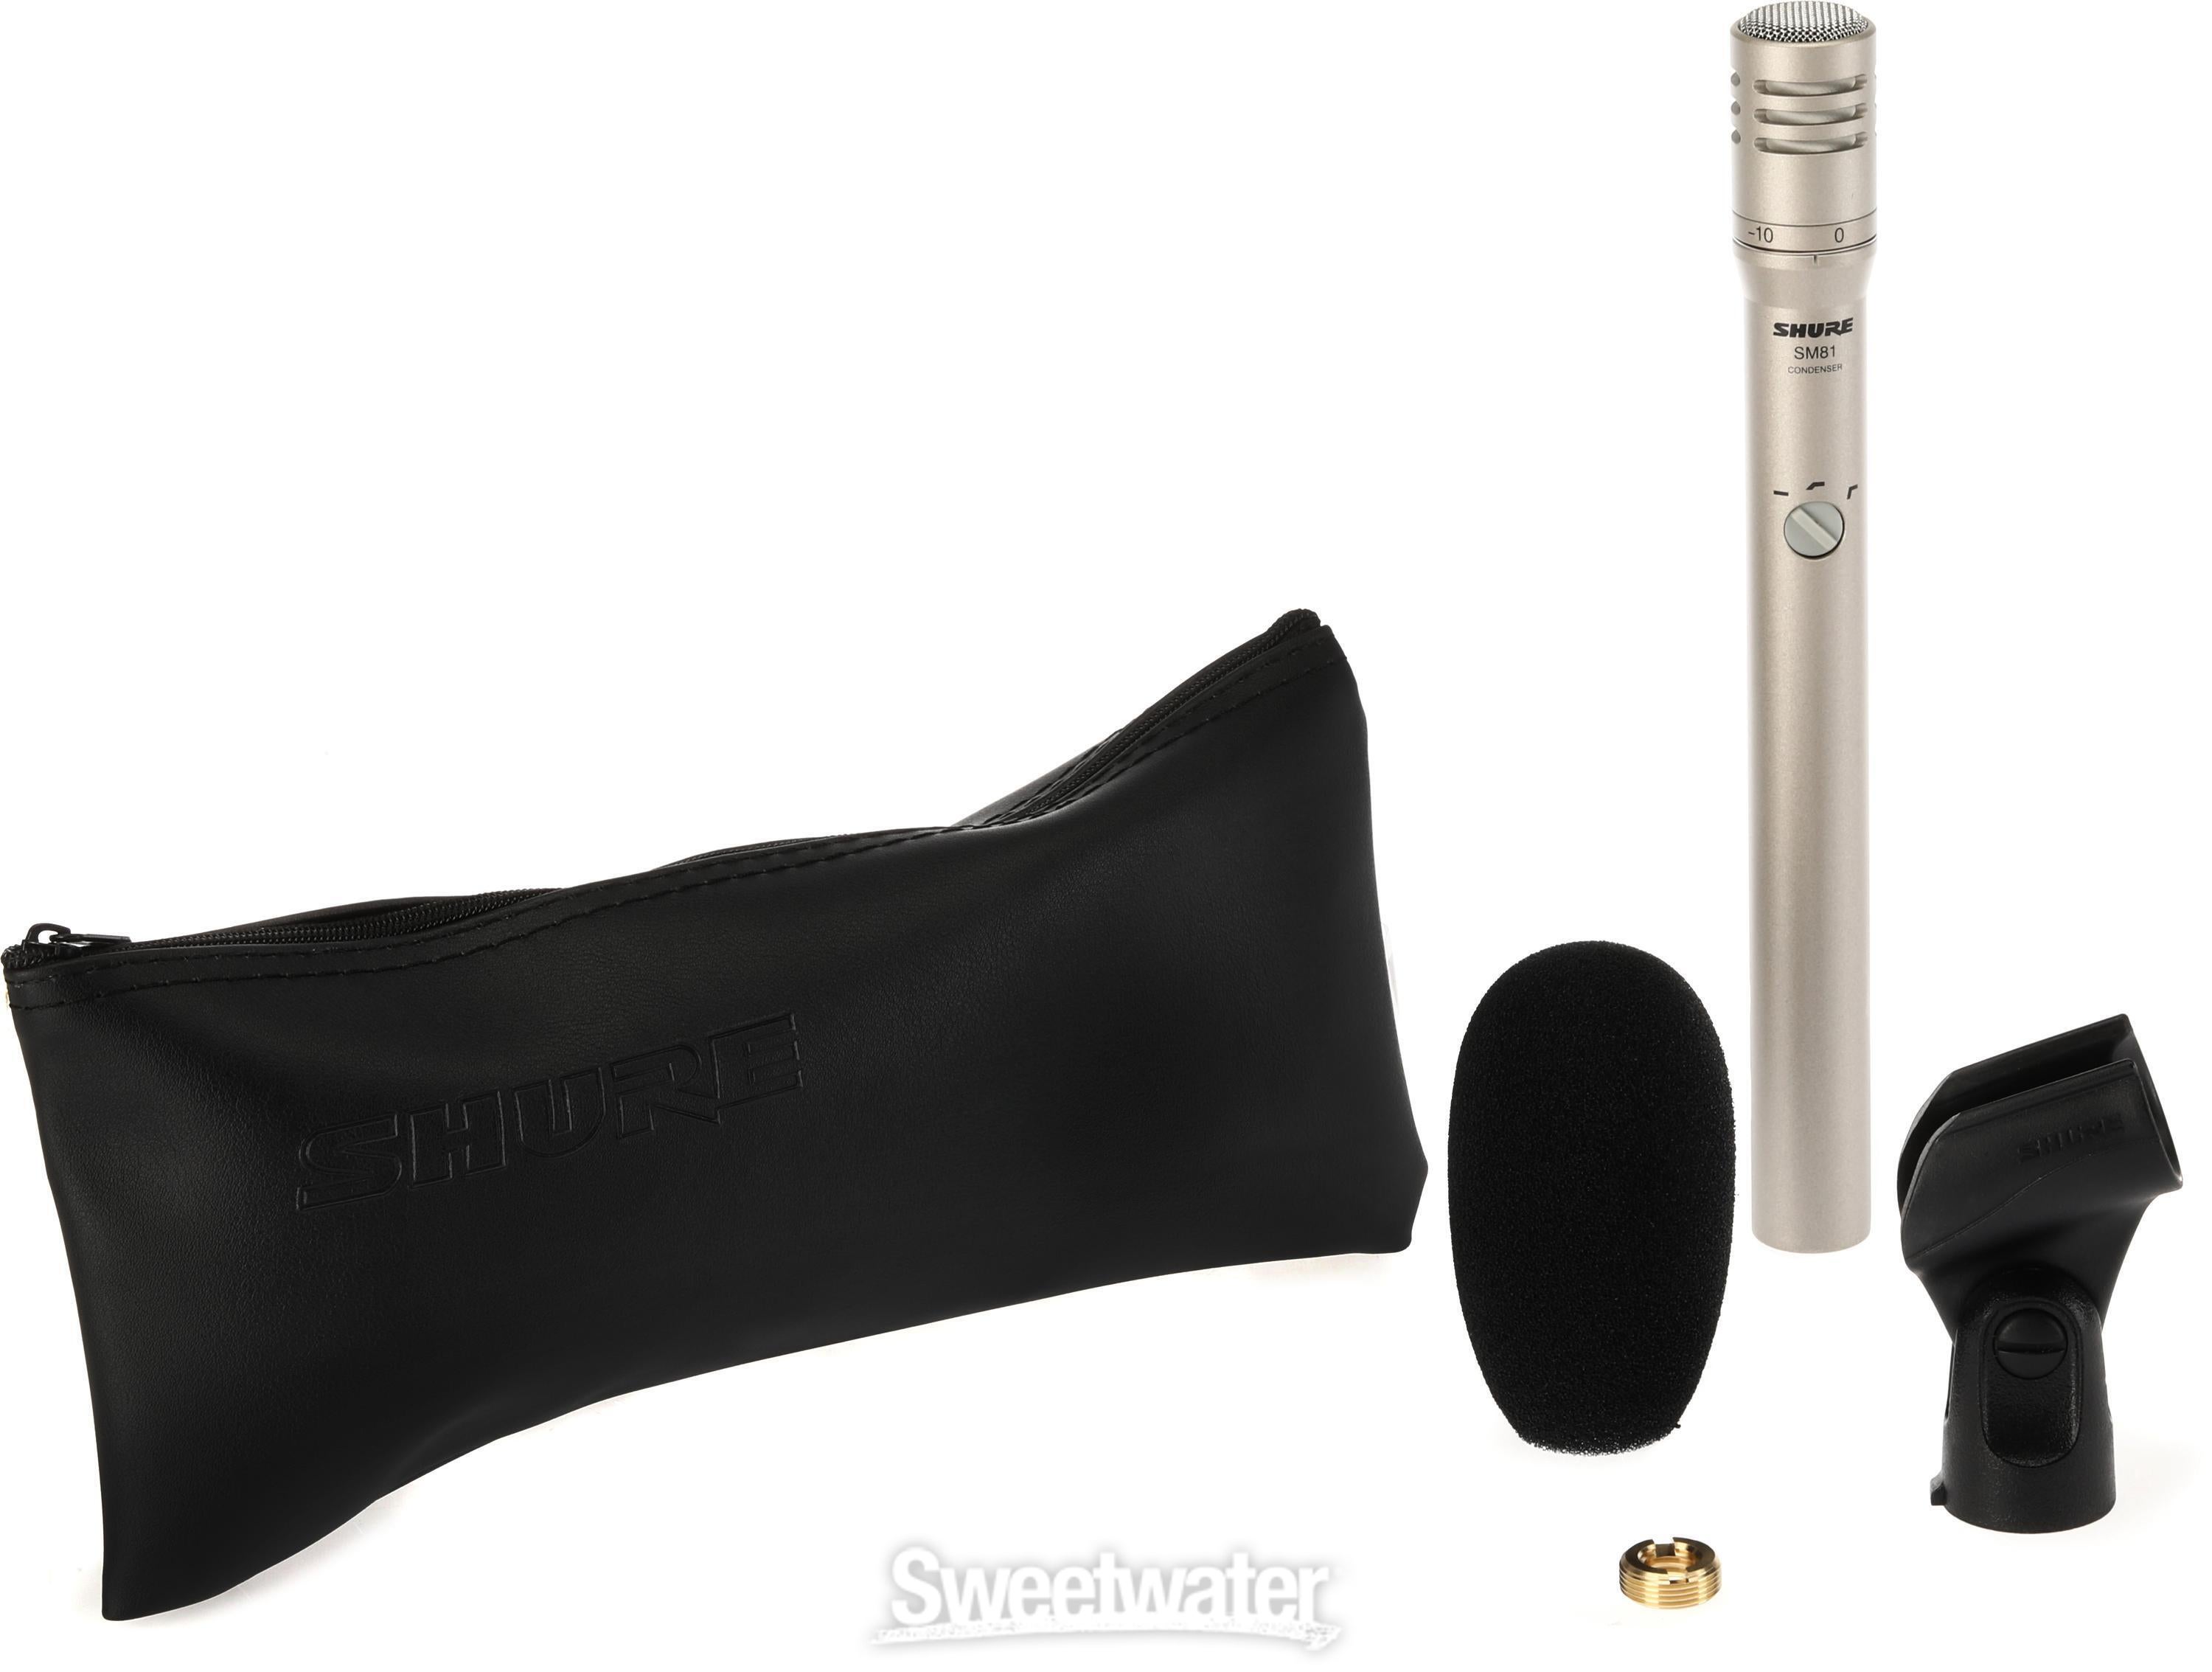 Shure SM81 Small-diaphragm Condenser Microphone | Sweetwater